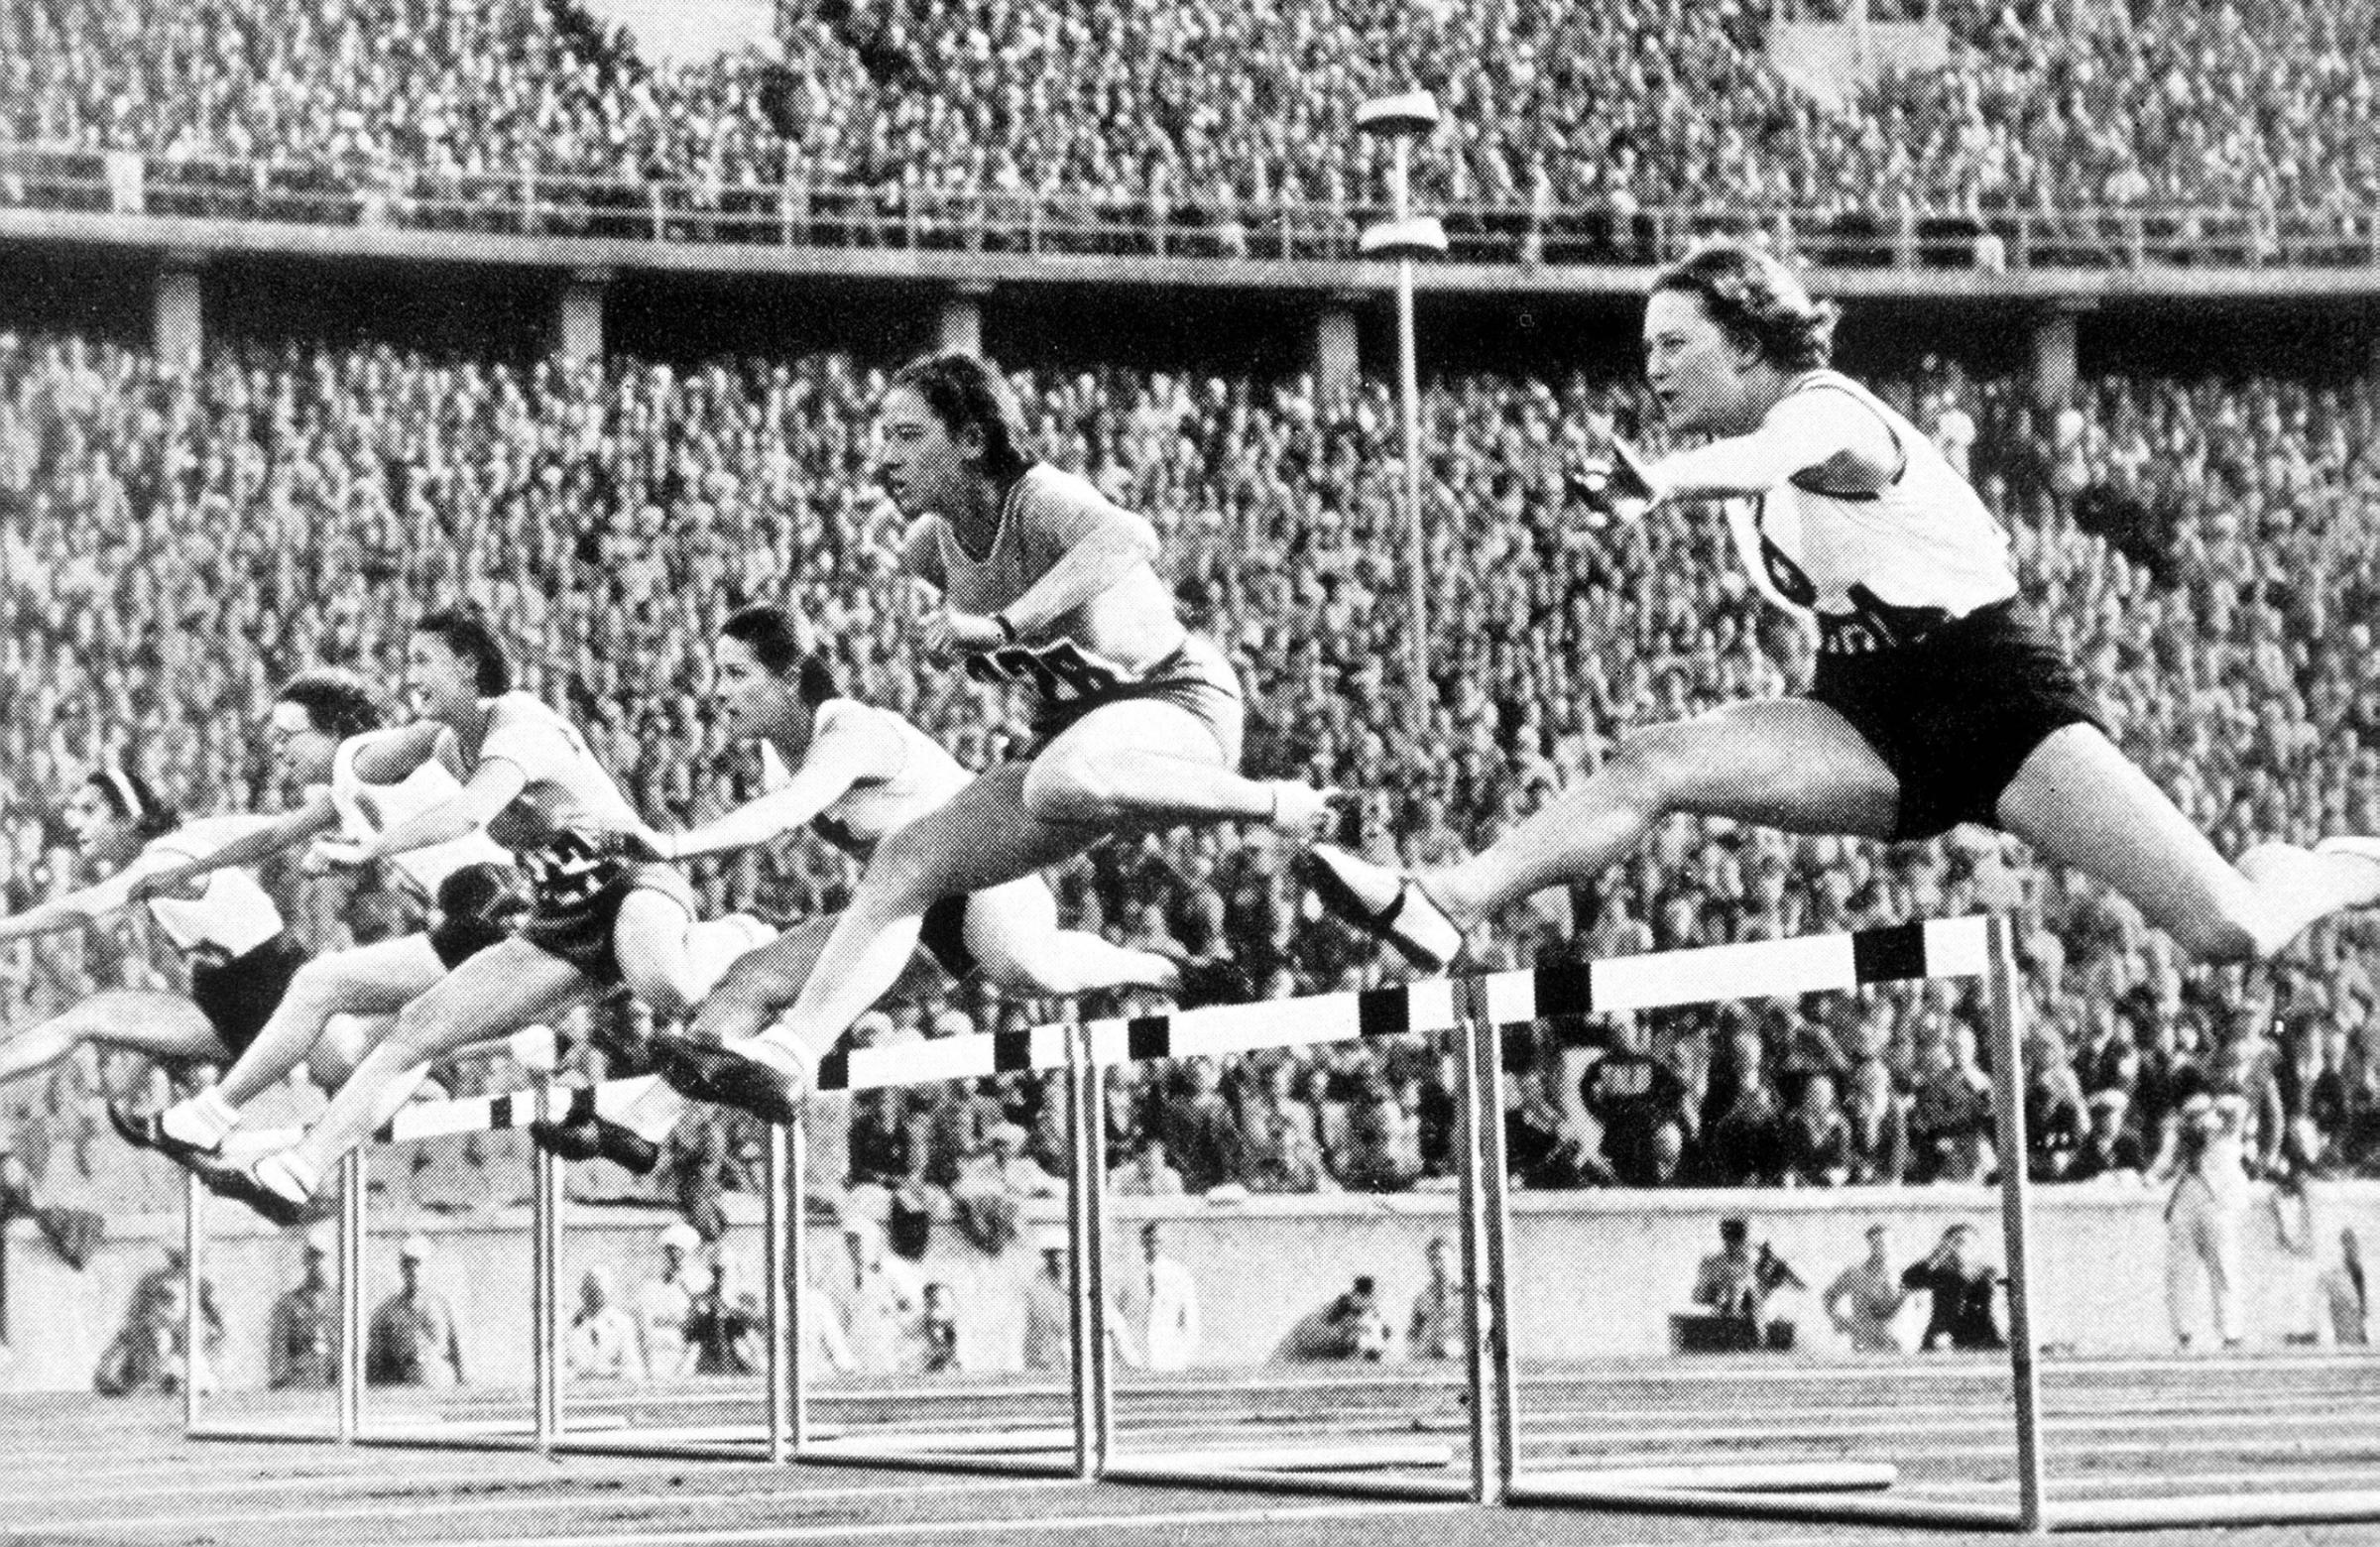 1936 Olympic Games, Berlin, Germany. Women's 80 Metres Hurdles, The start of the race which was won by Valle of Italy.